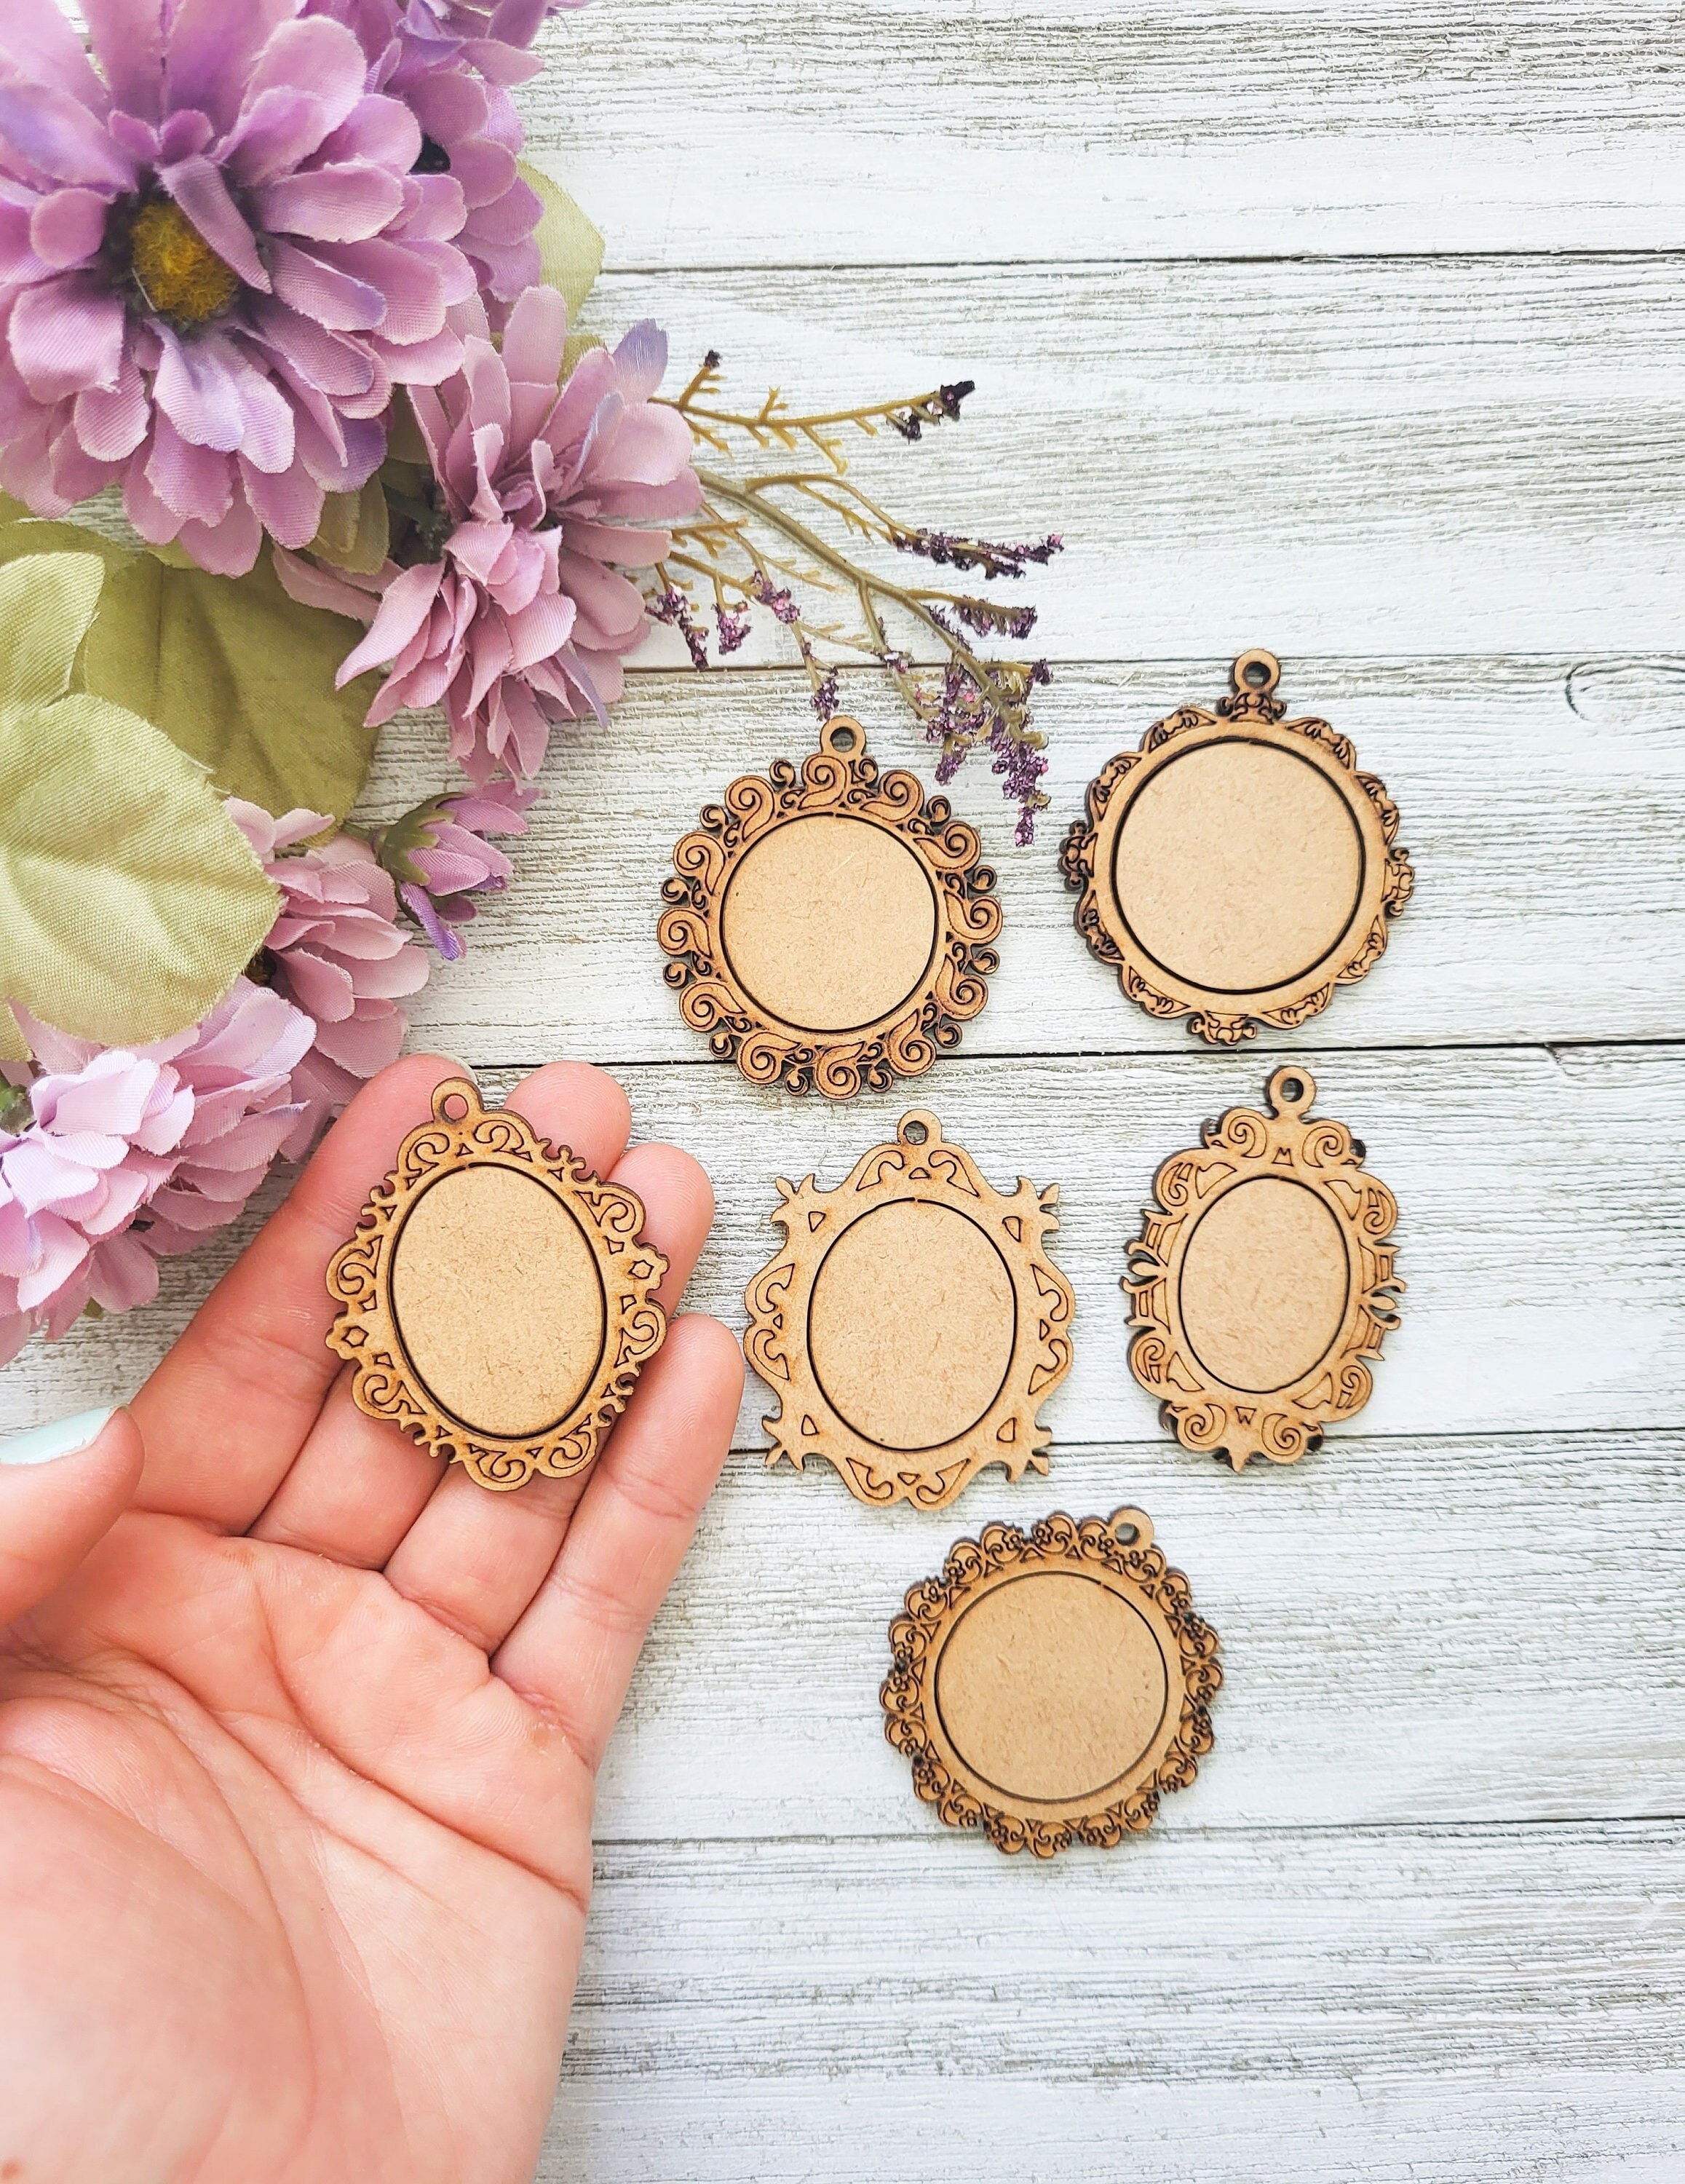 Wooden Embroidery Hoops Stitching Wooden Hoops&stands Cross Stitch  Hoop,round Frame, Hoop Art Embroidery Ring-1 Pieces 